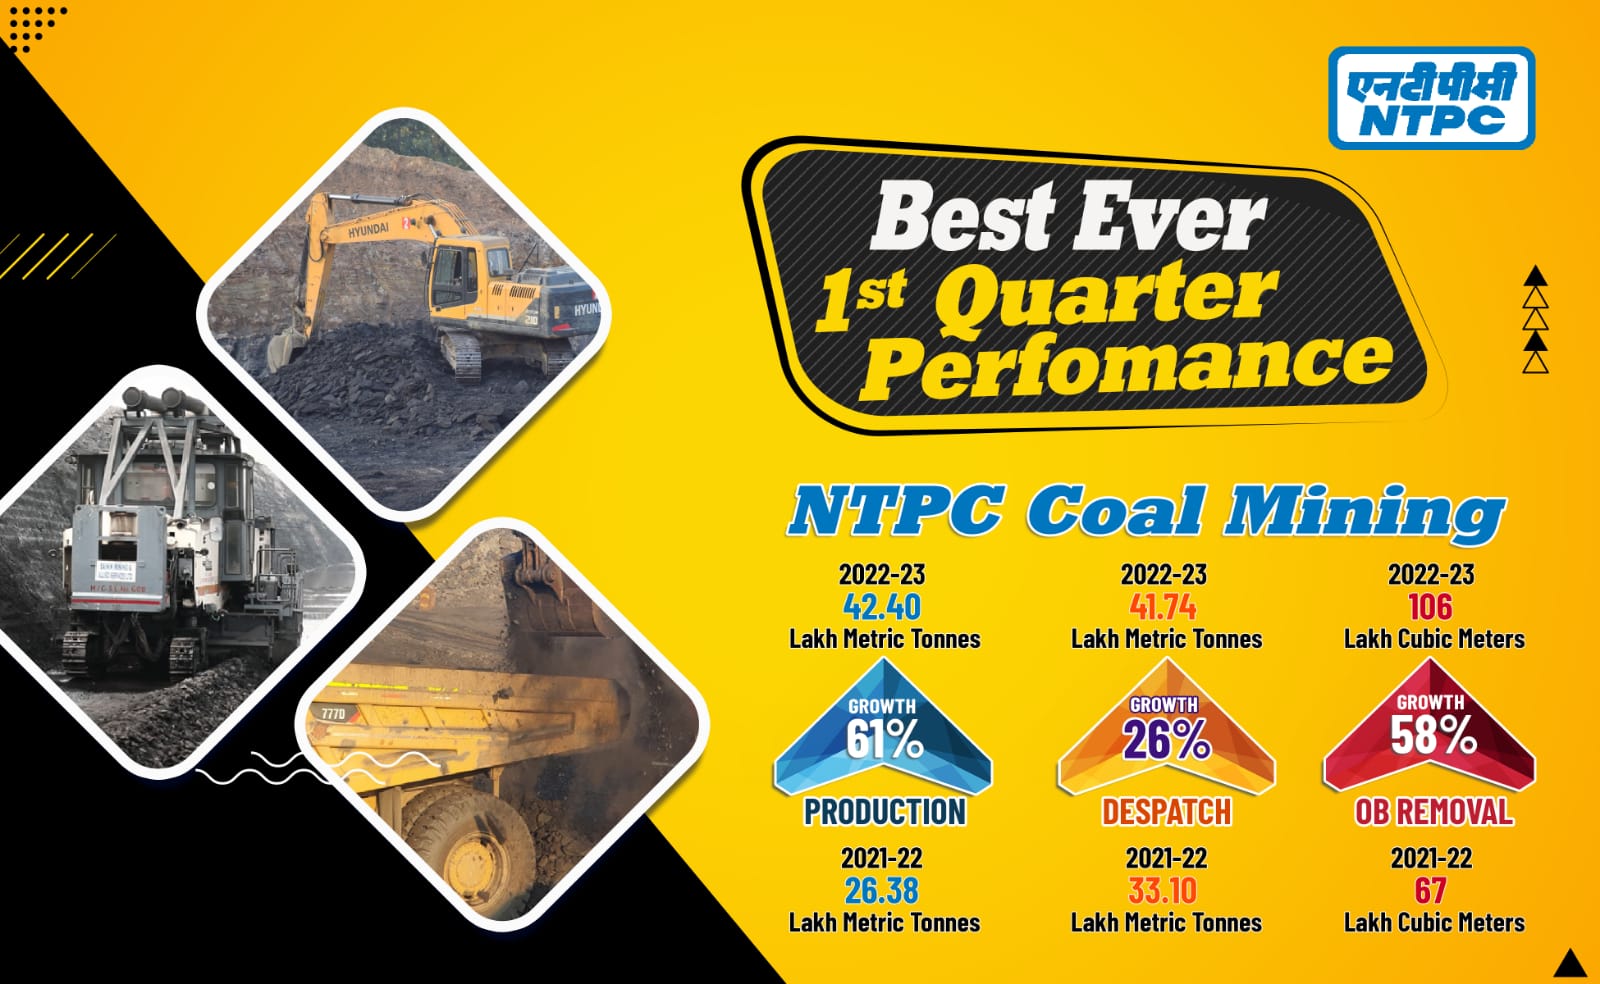 NTPC Coal Mining achieves 42.40 lac metric tonnes of coal production in first quarter FY23